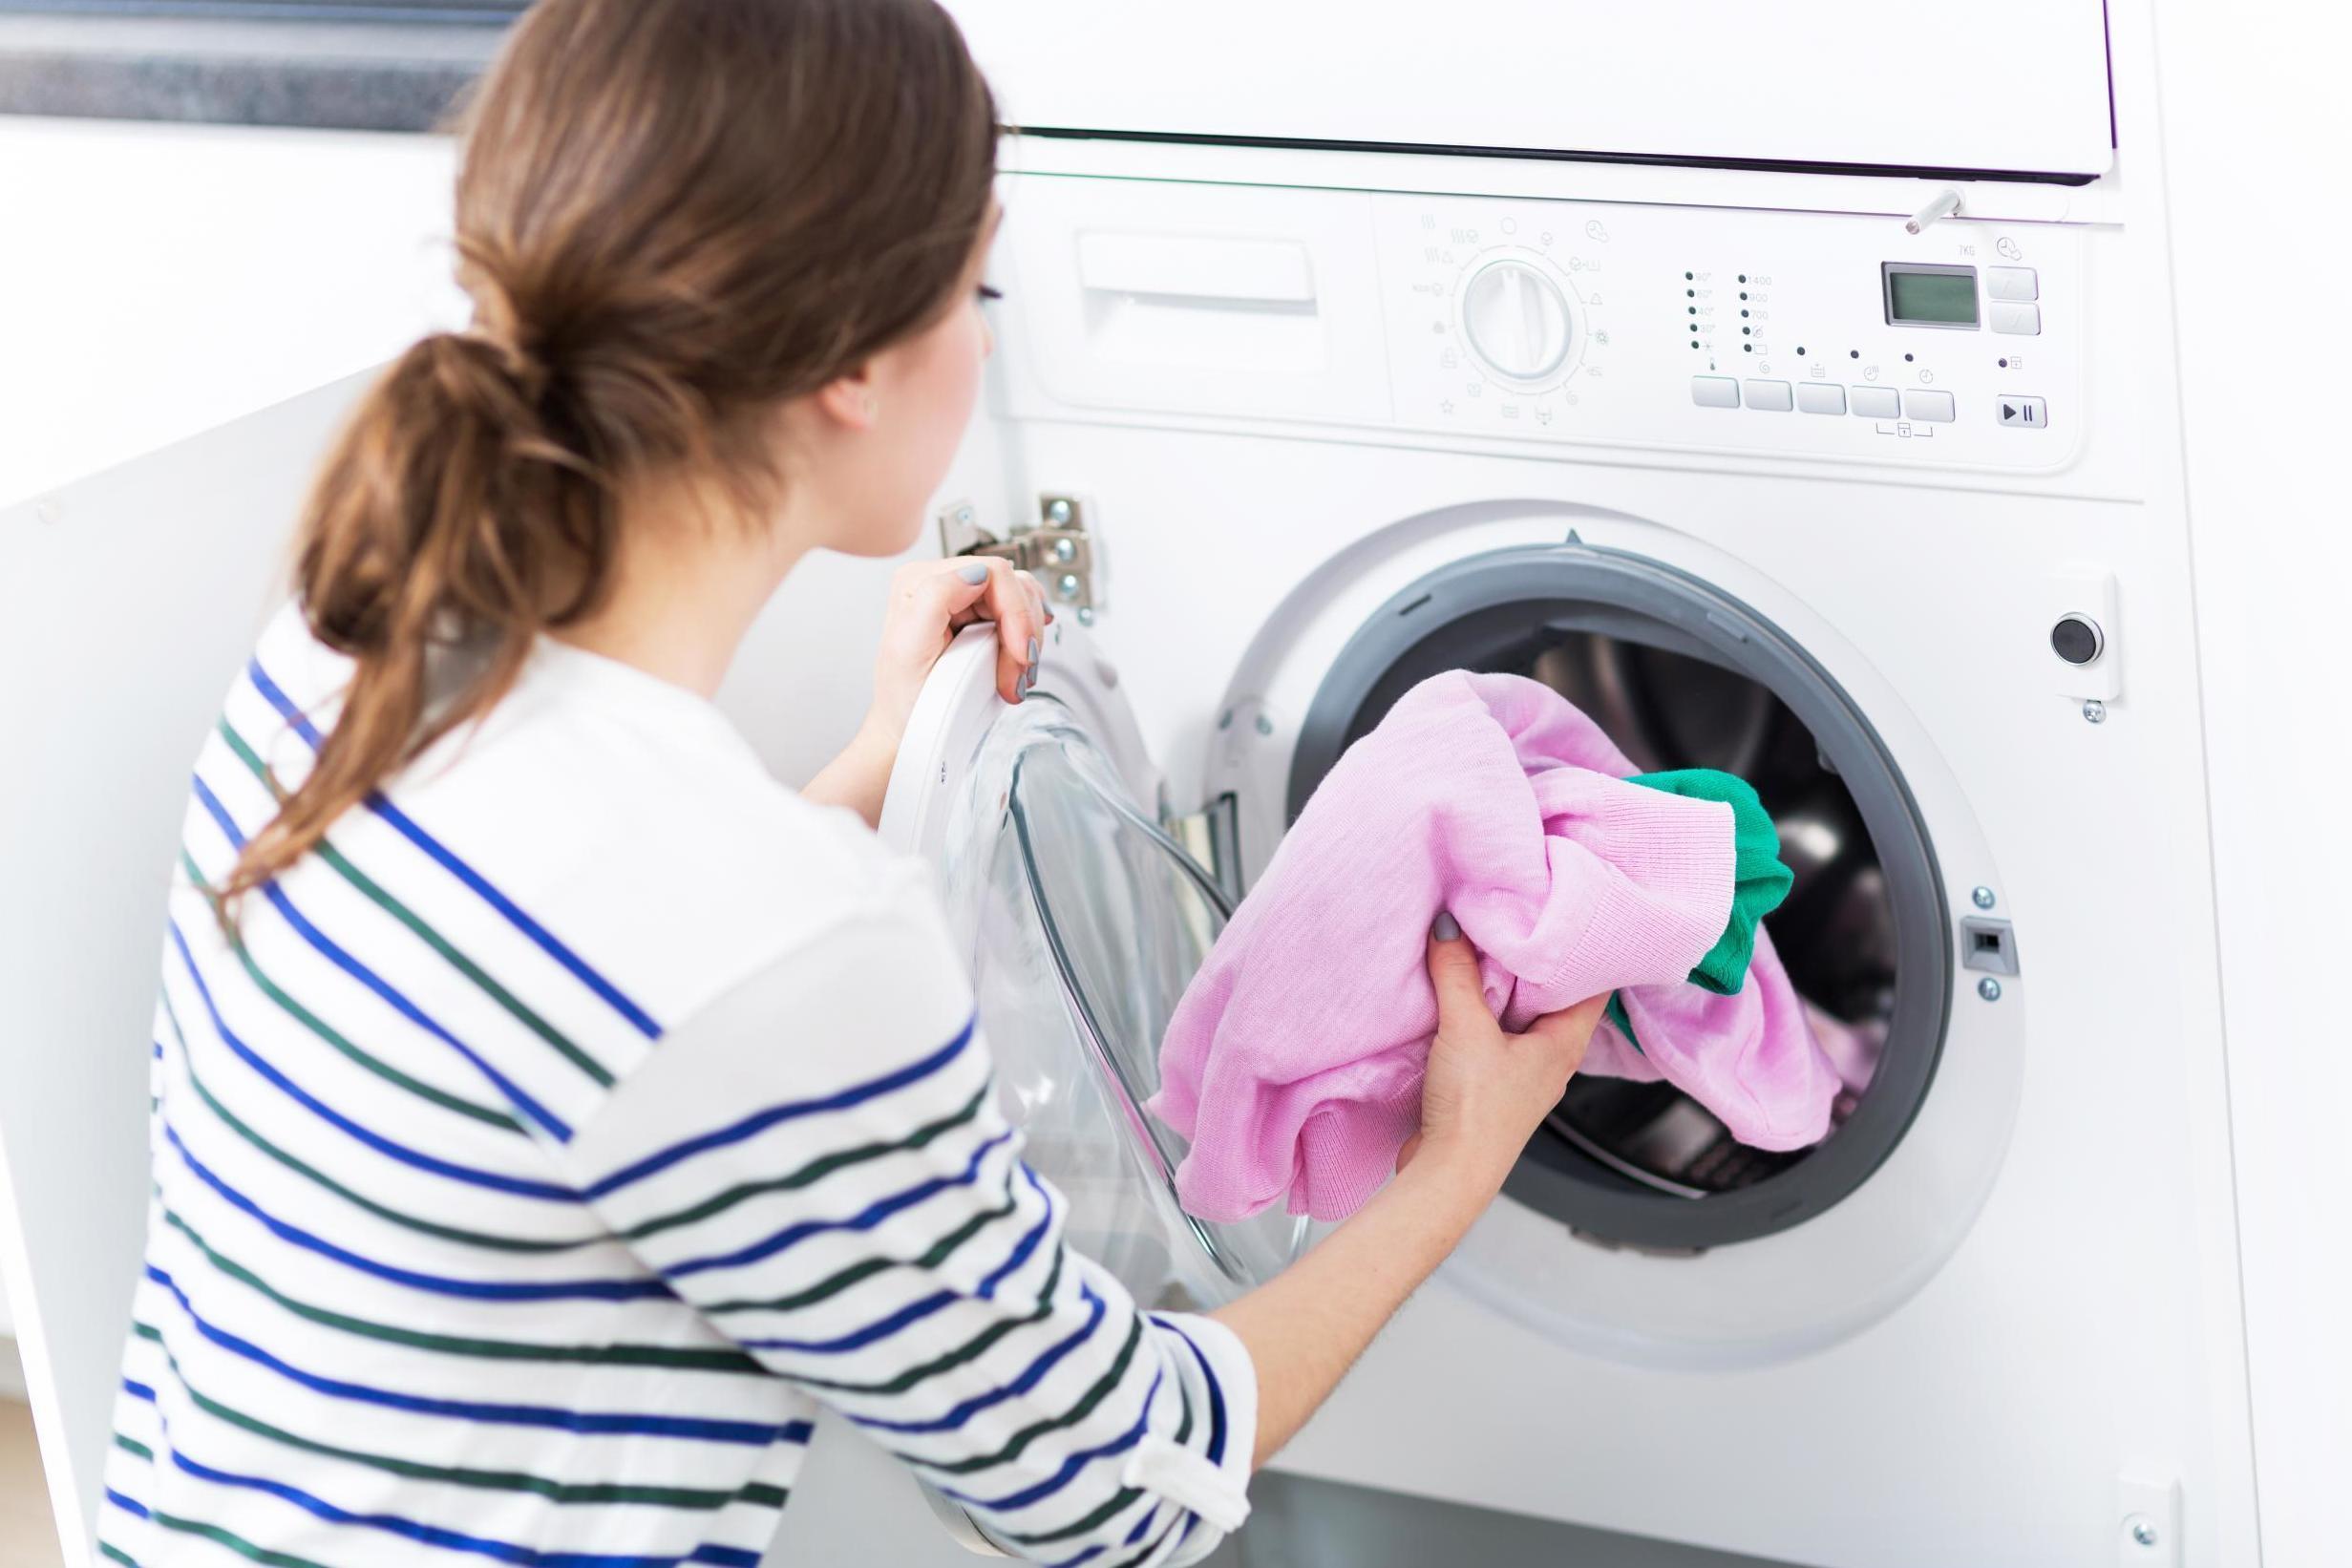 Should You Wash New Clothing Before Wearing It? Experts Say Yes